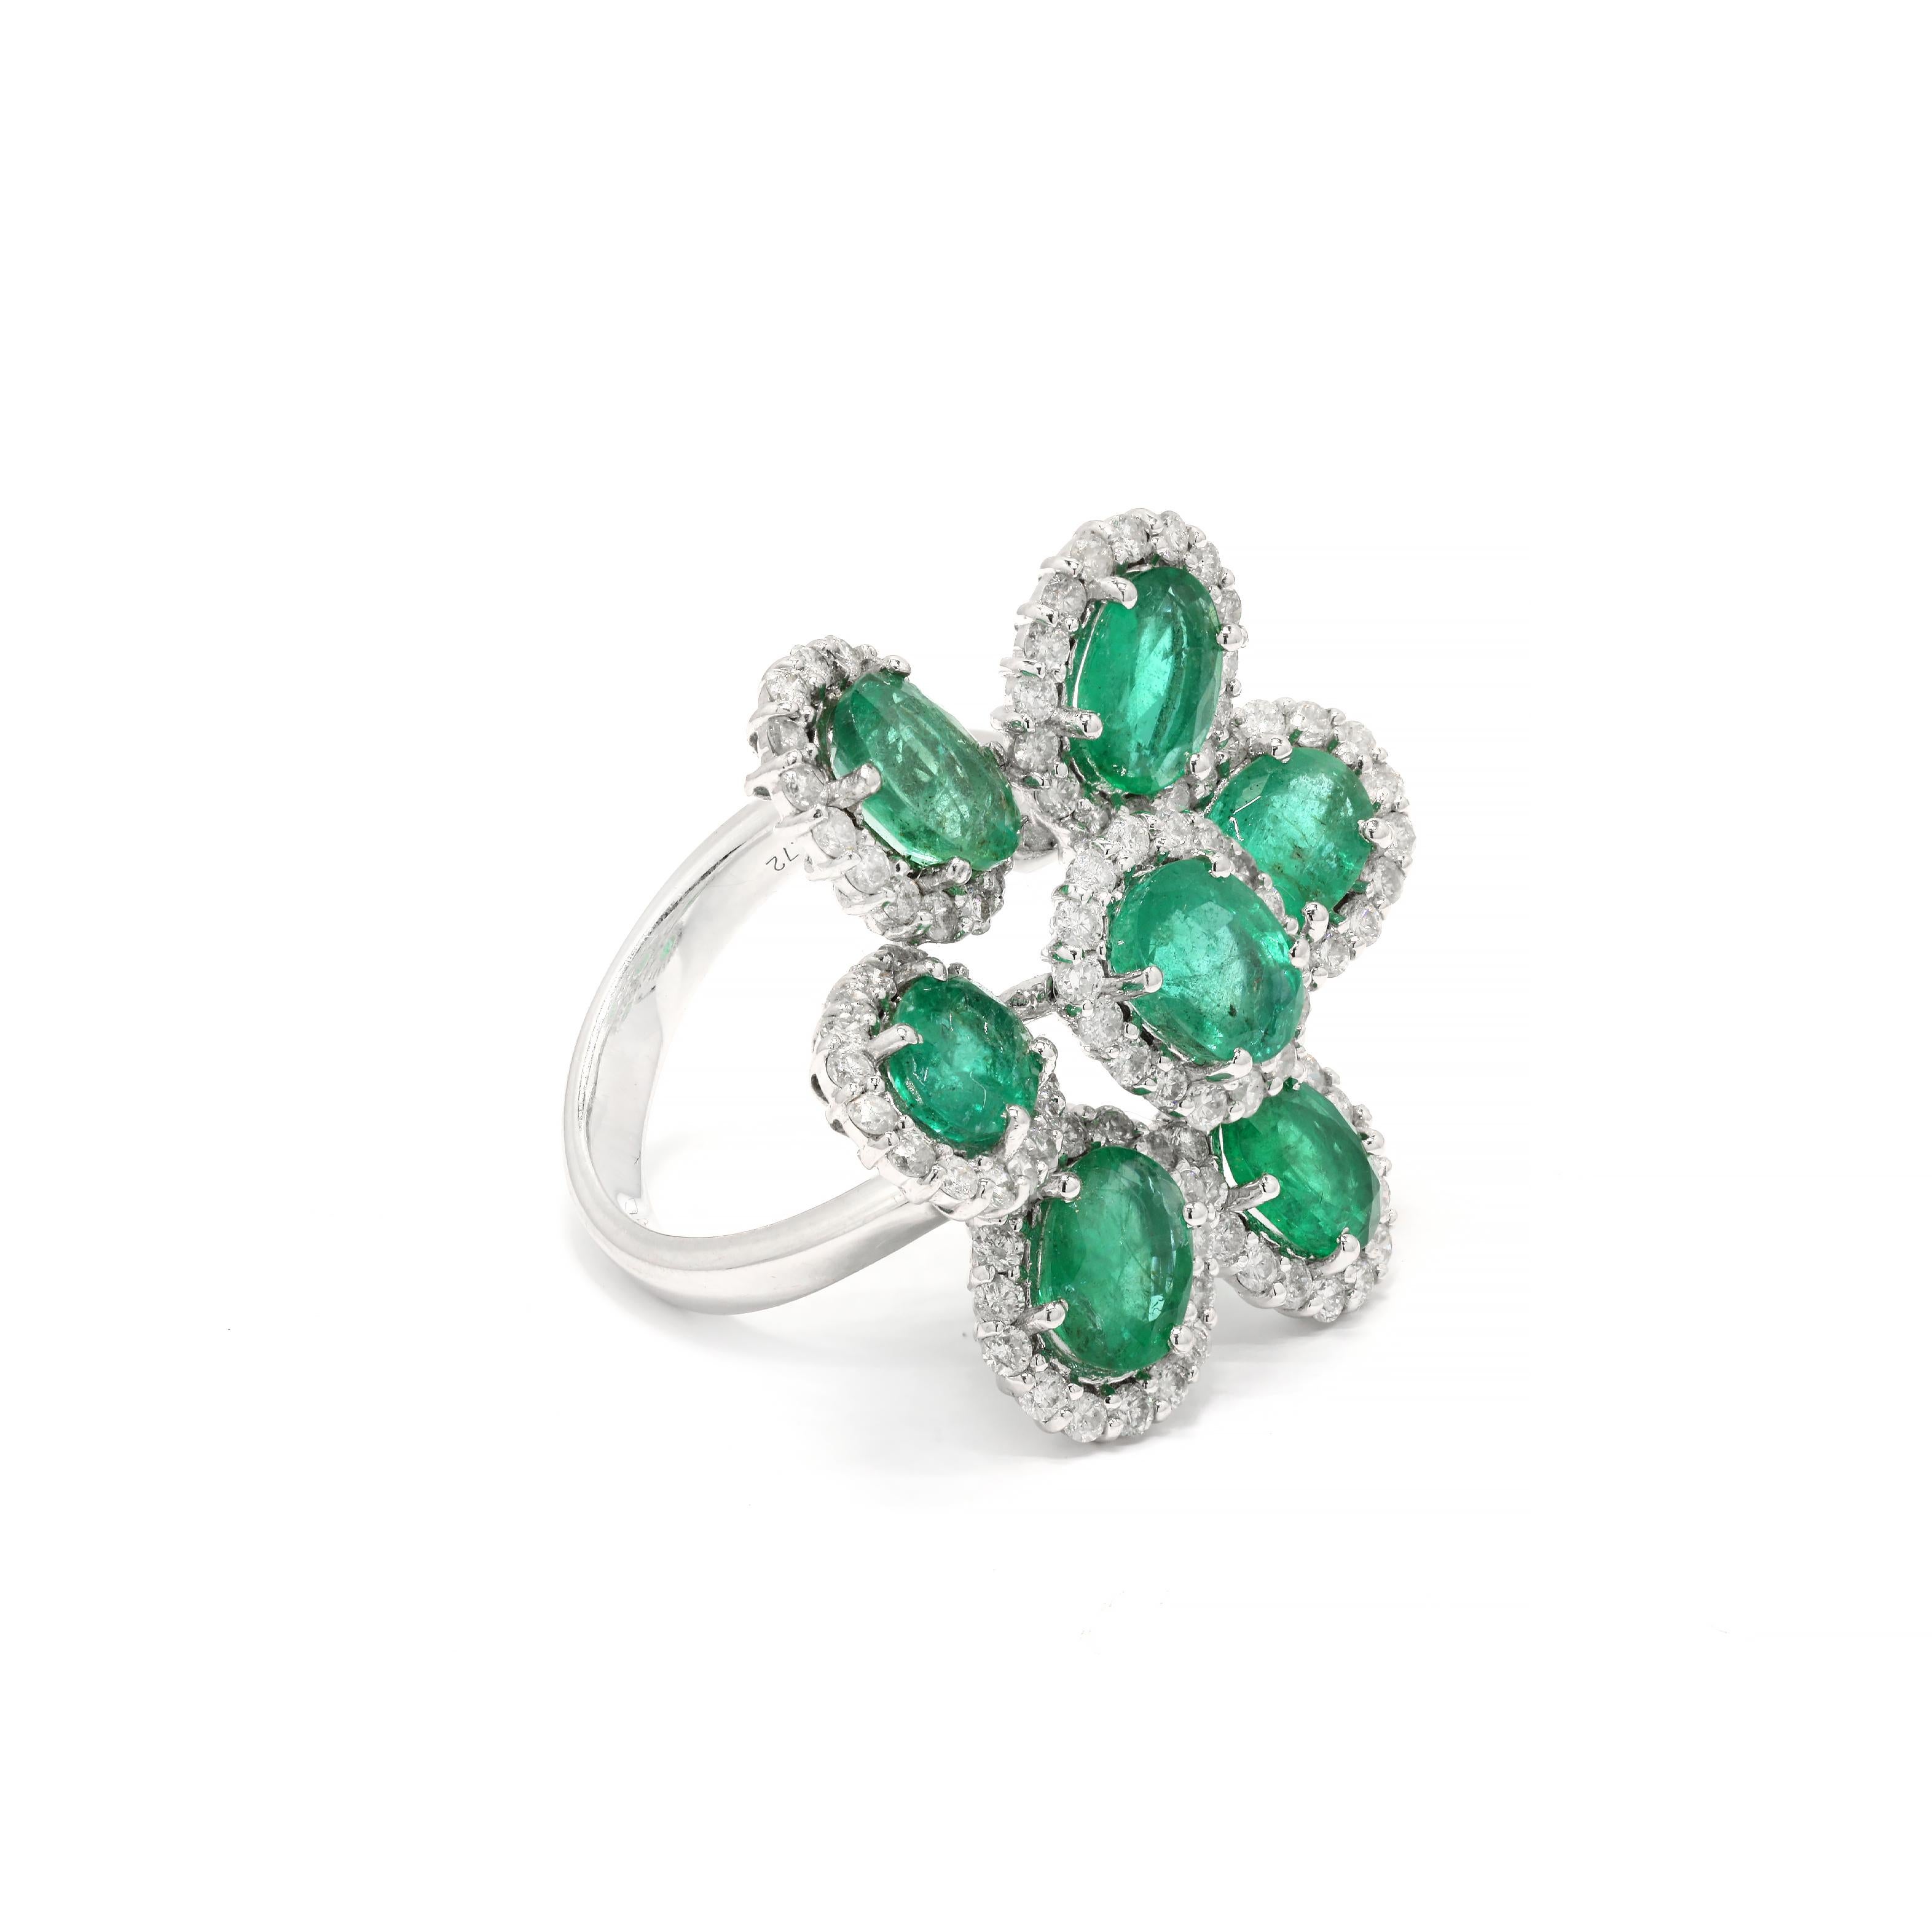 For Sale:  Statement 5 ct Emerald Flower Ring with Halo Diamonds in 14 Karat White Gold 6